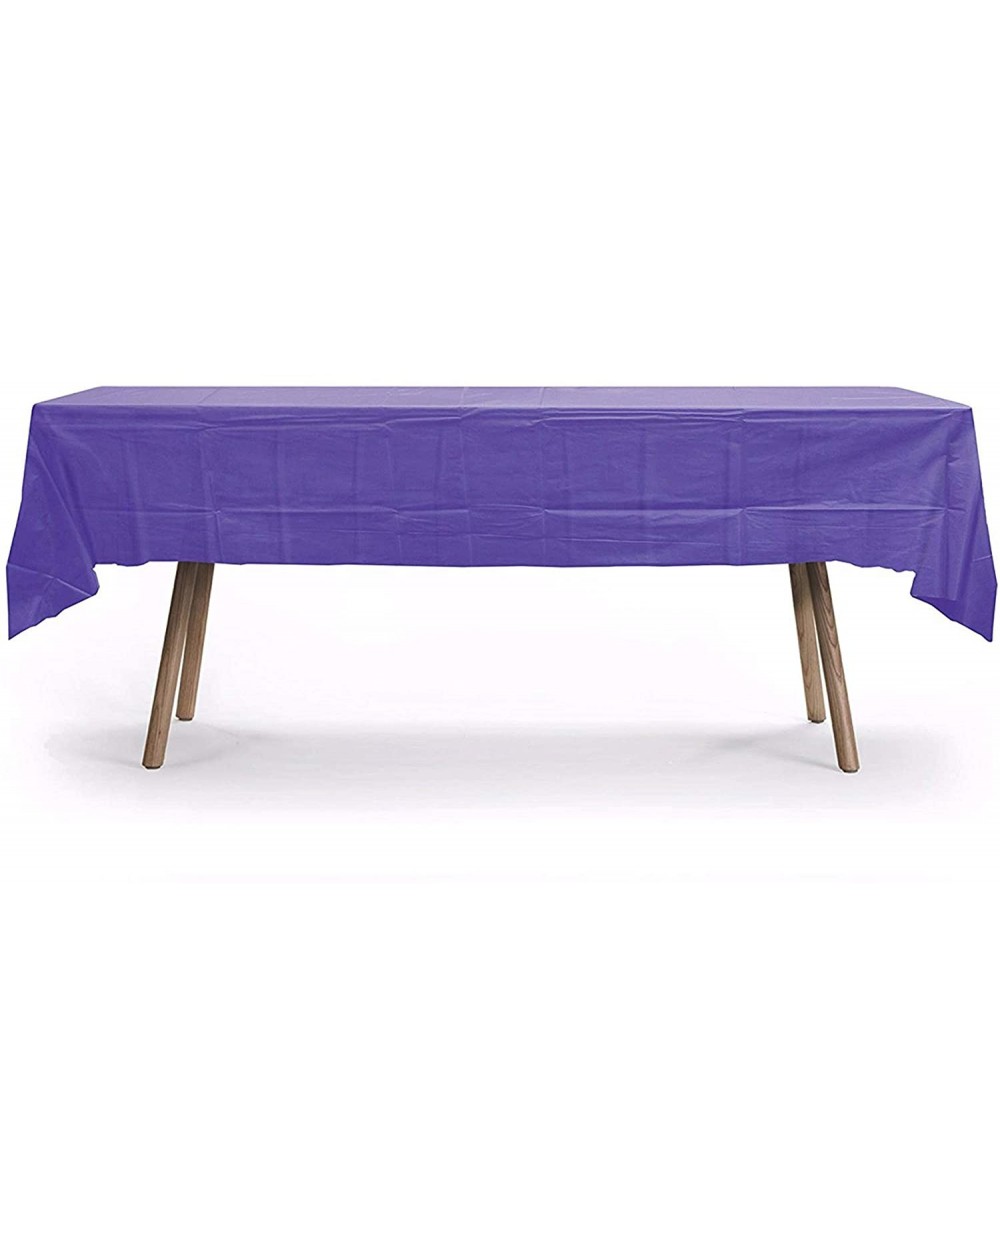 Tablecovers GiftExpressions 6-Pack Party Disposal Premium Plastic Tablecloth 54 Inch. x 108 Inch. Rectangle Table Cover (Purp...